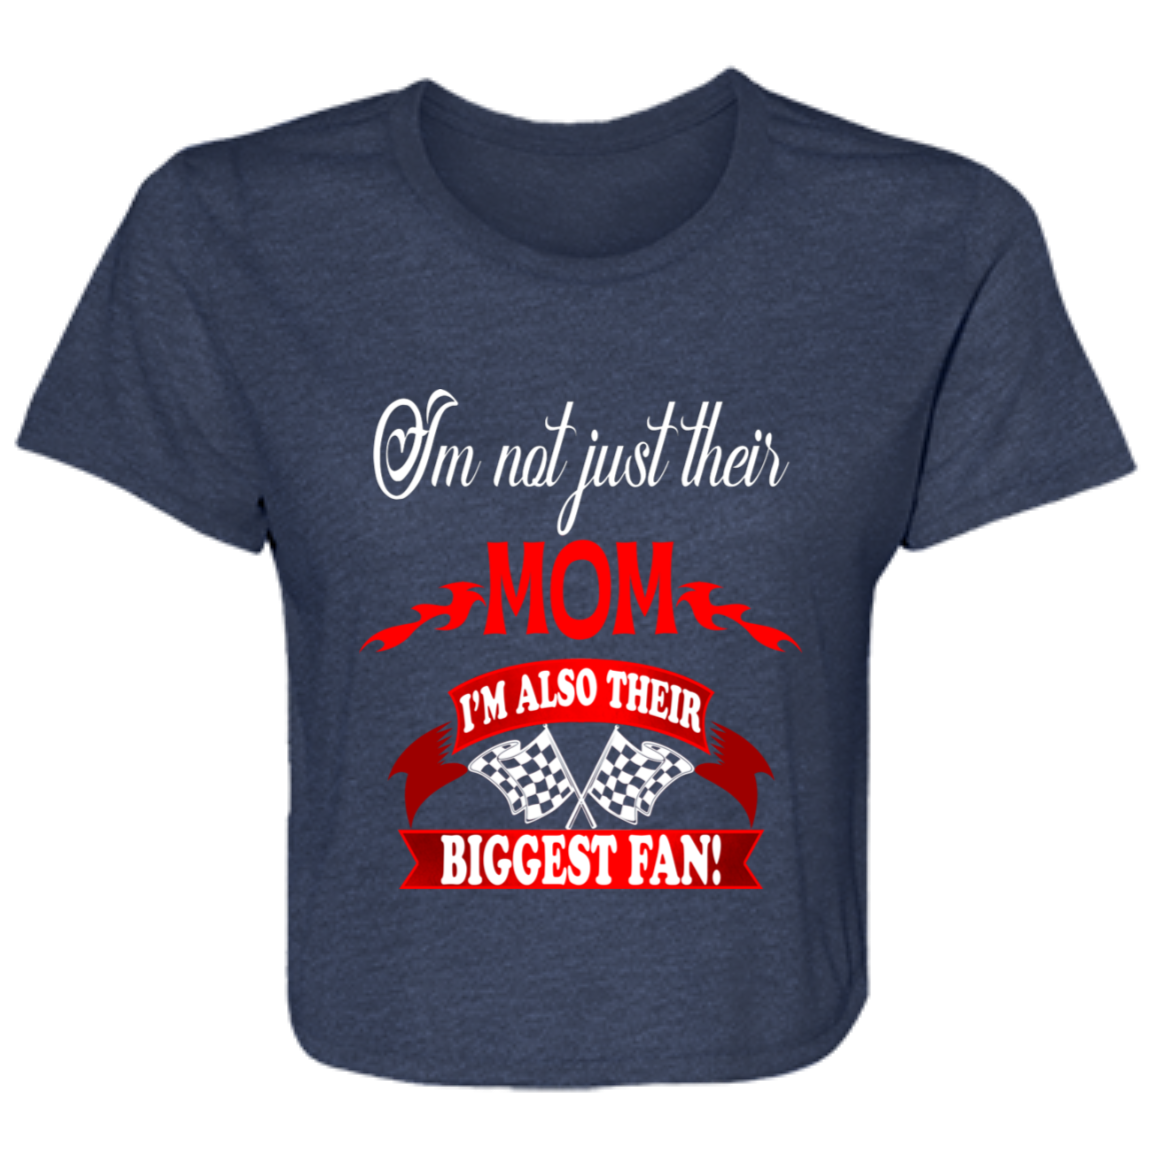 I'm Not Just their Mom I'm Also their Biggest fans Cropped Tees